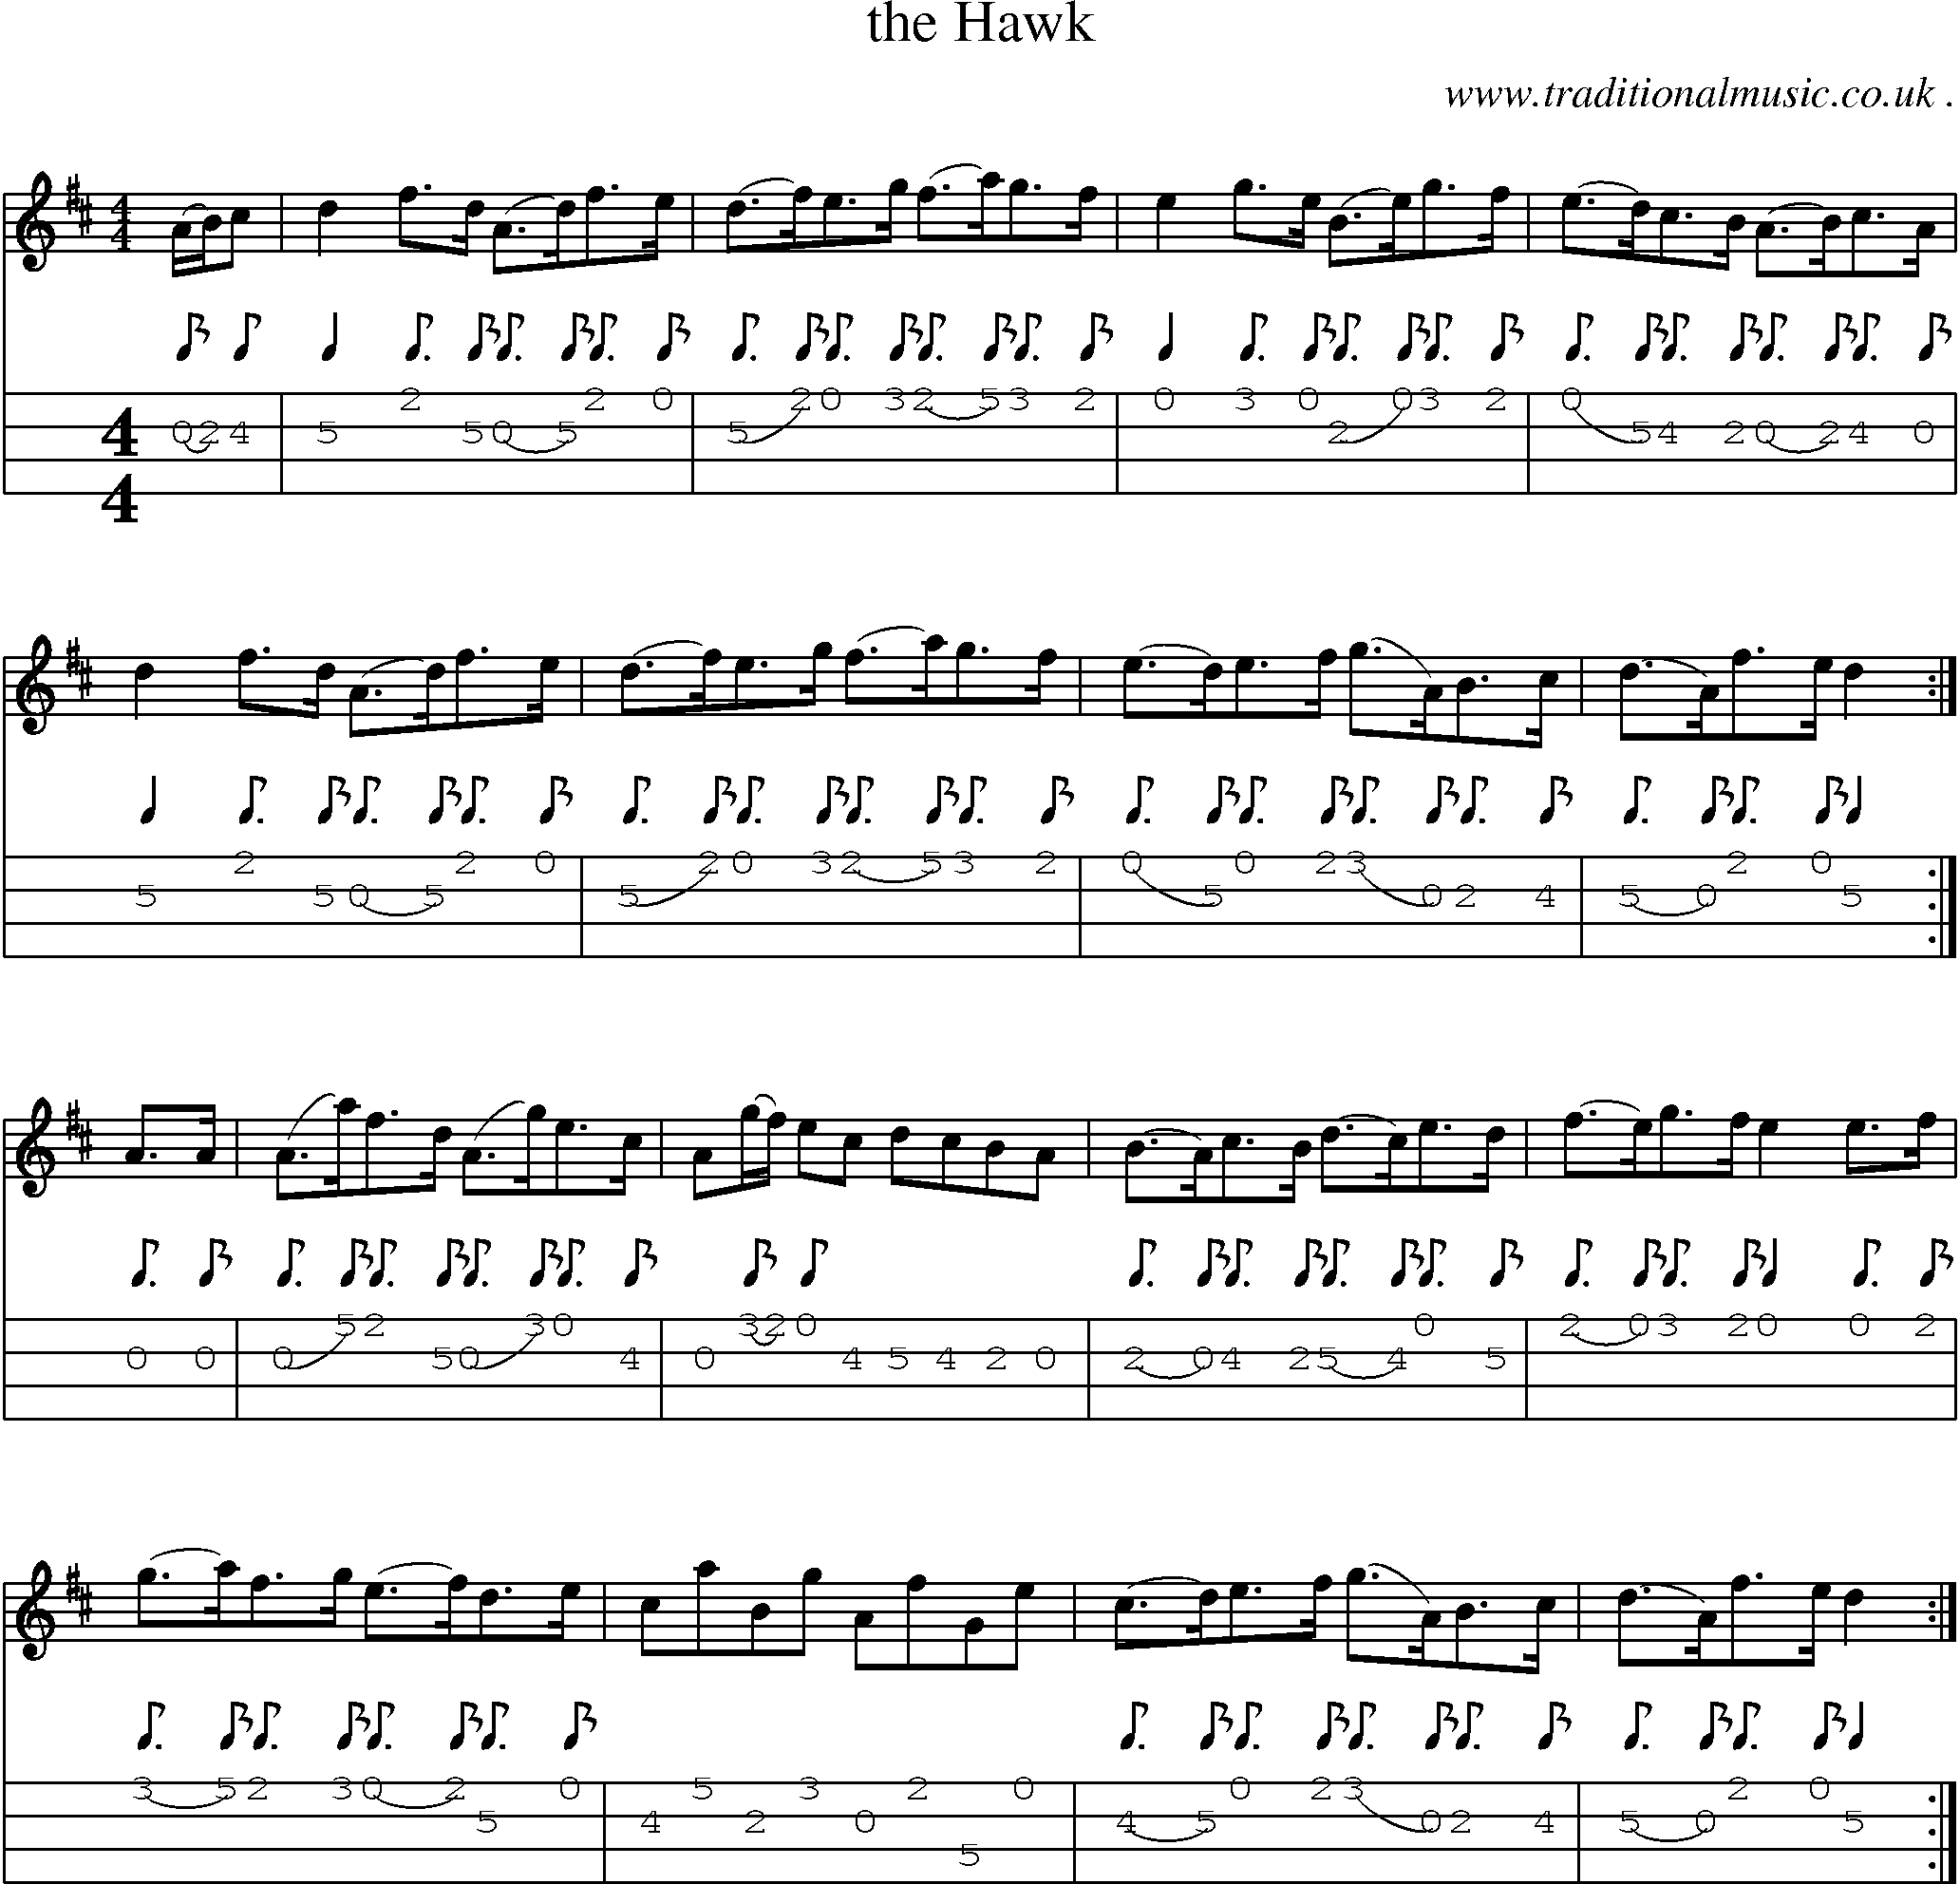 Sheet-music  score, Chords and Mandolin Tabs for The Hawk